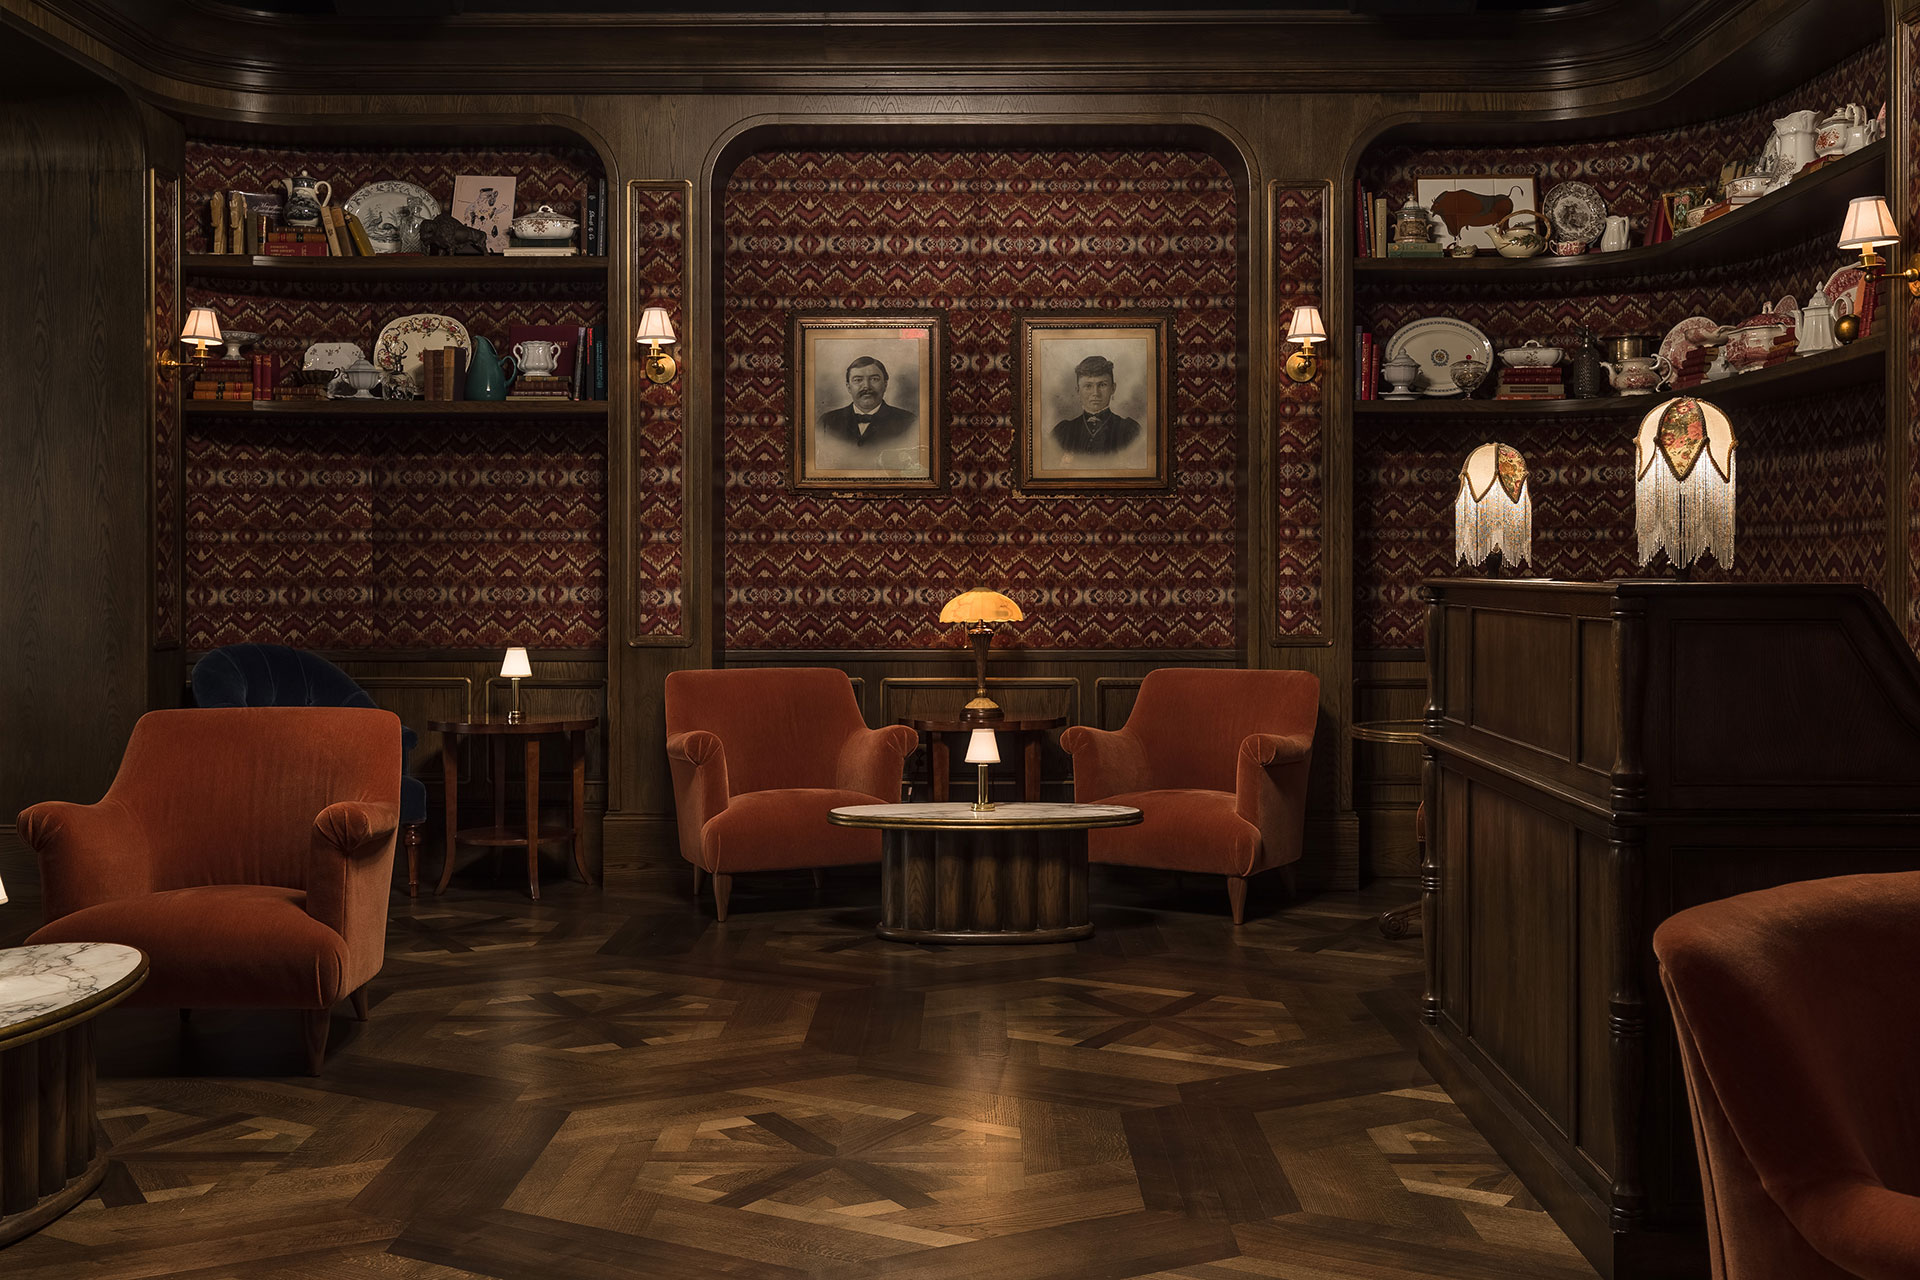 a dark, moody restaurant entry with custom woody flooring in a hex pattern, two velvet chairs, lamp, and drink table in the center with antiques on shelves above on a wallpapered wall and a tall wooden host's podium on the right.